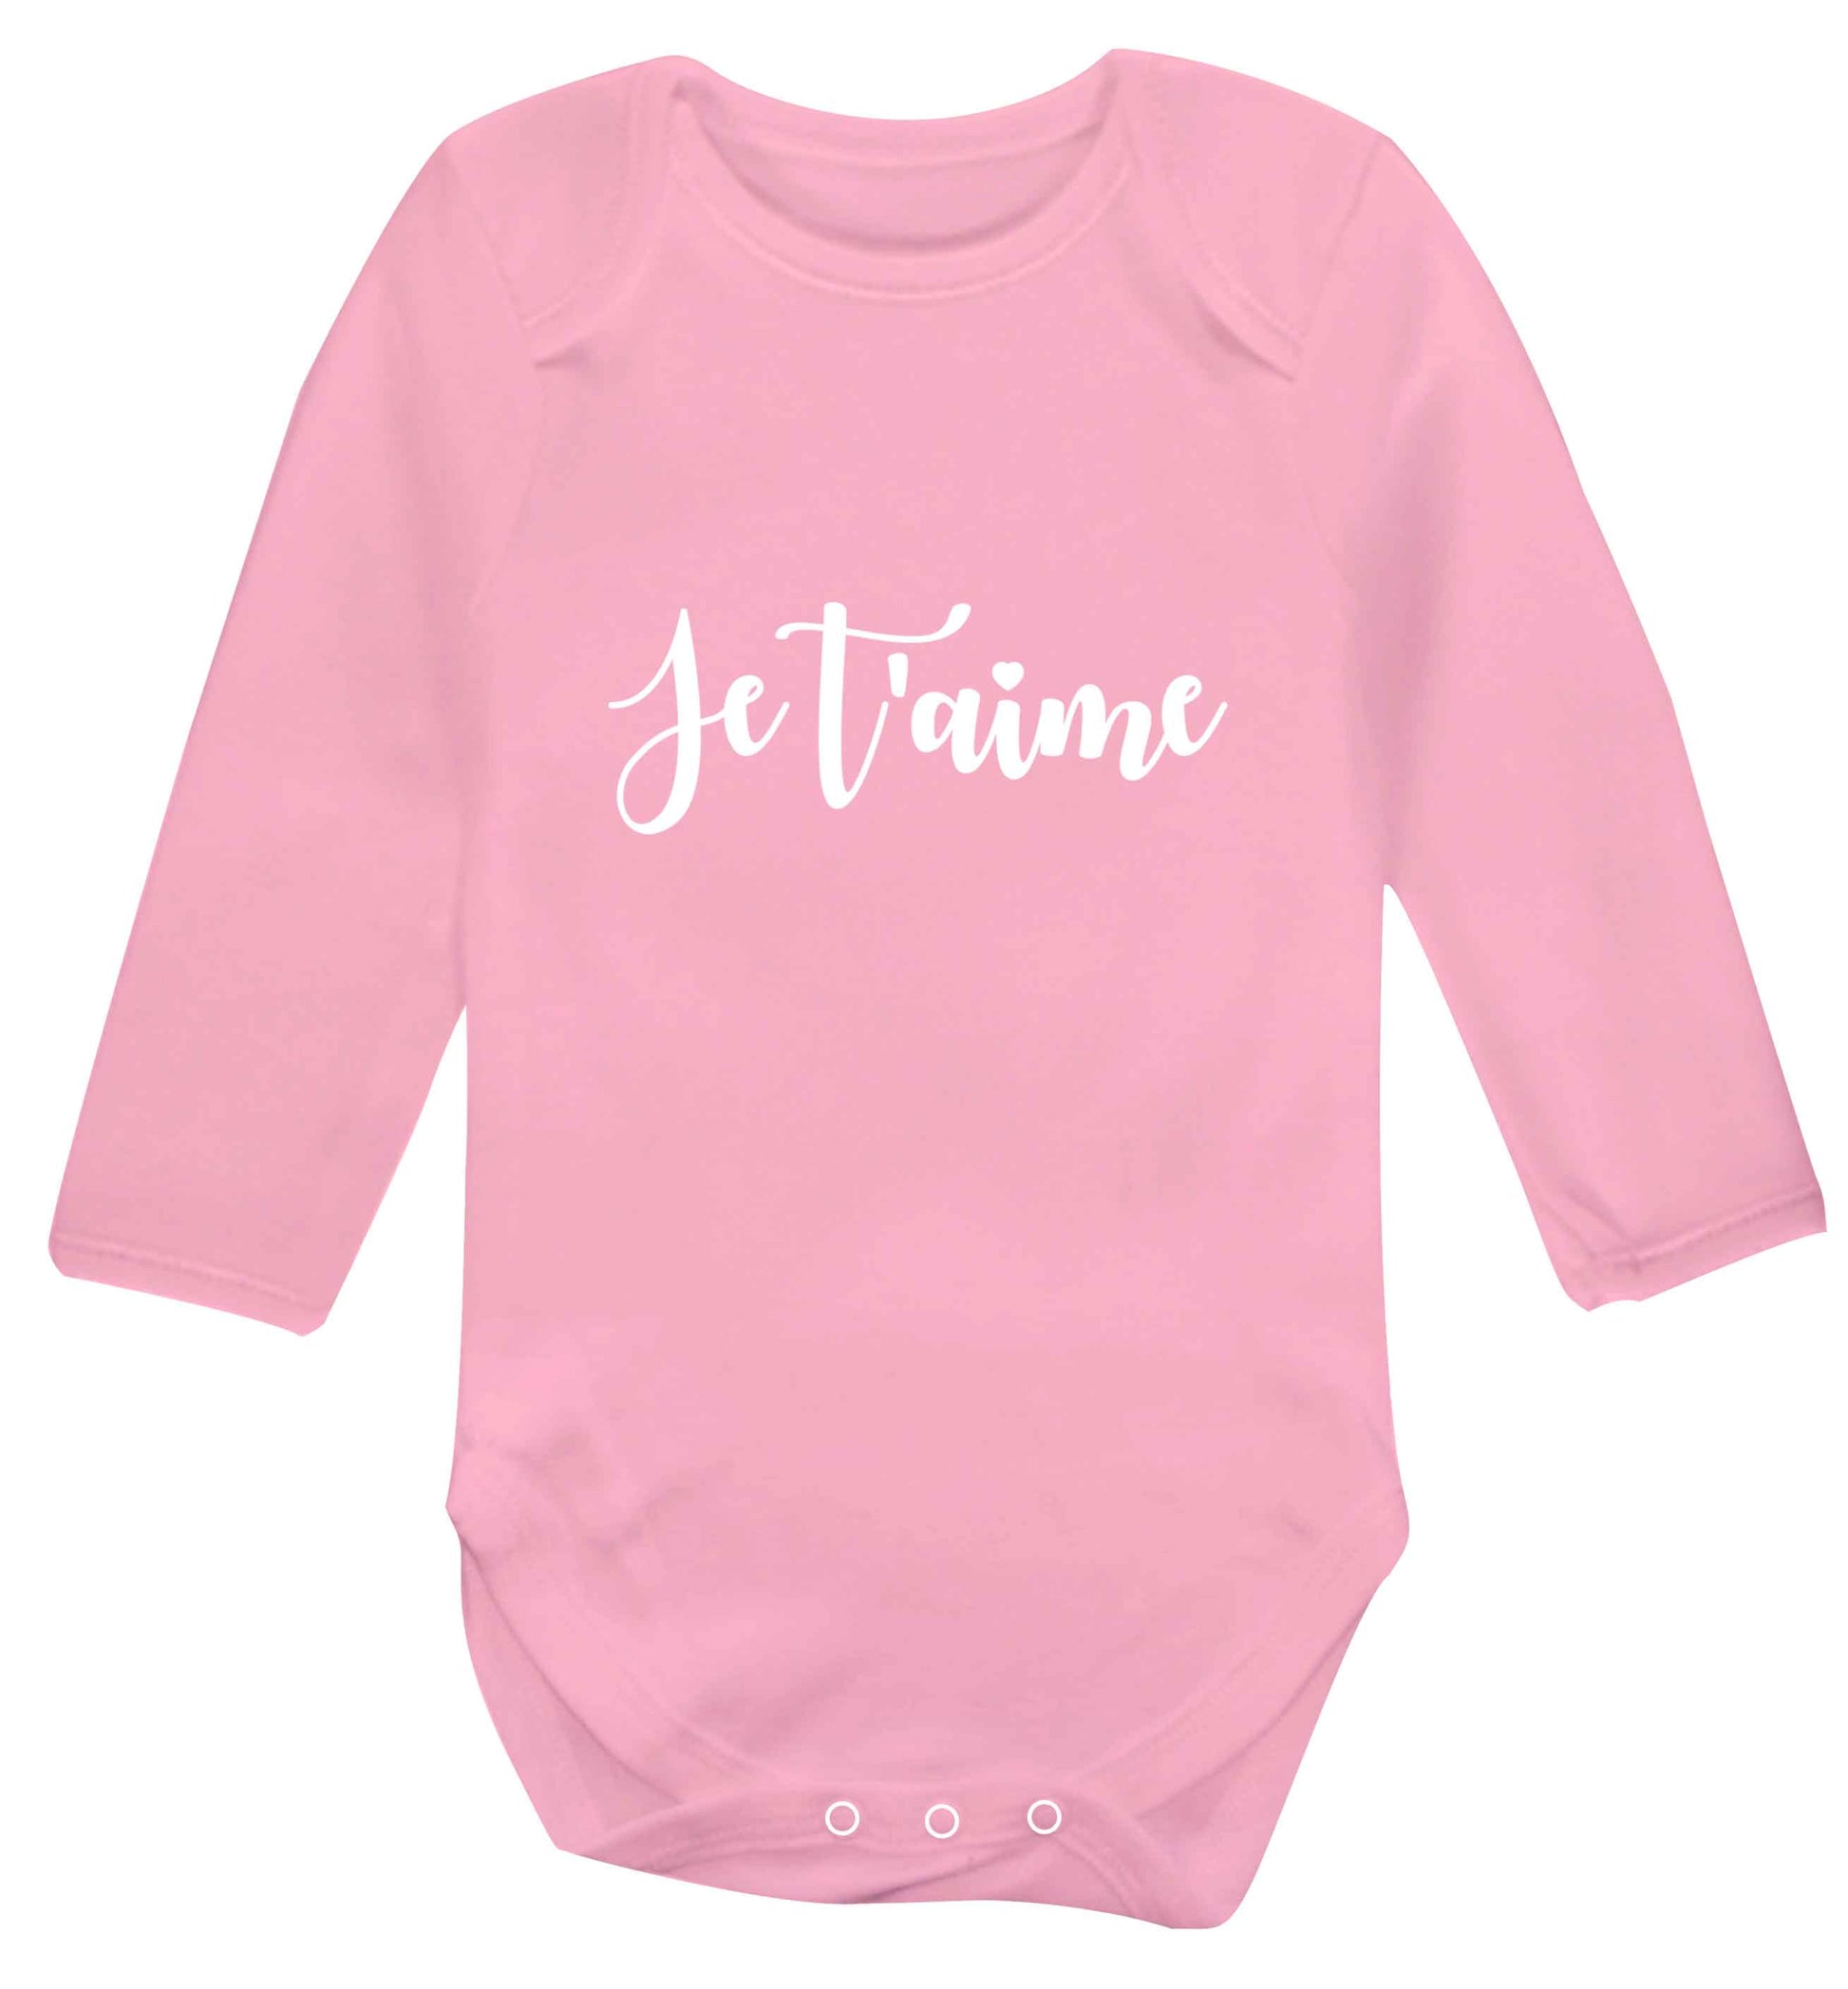 Je t'aime baby vest long sleeved pale pink 6-12 months